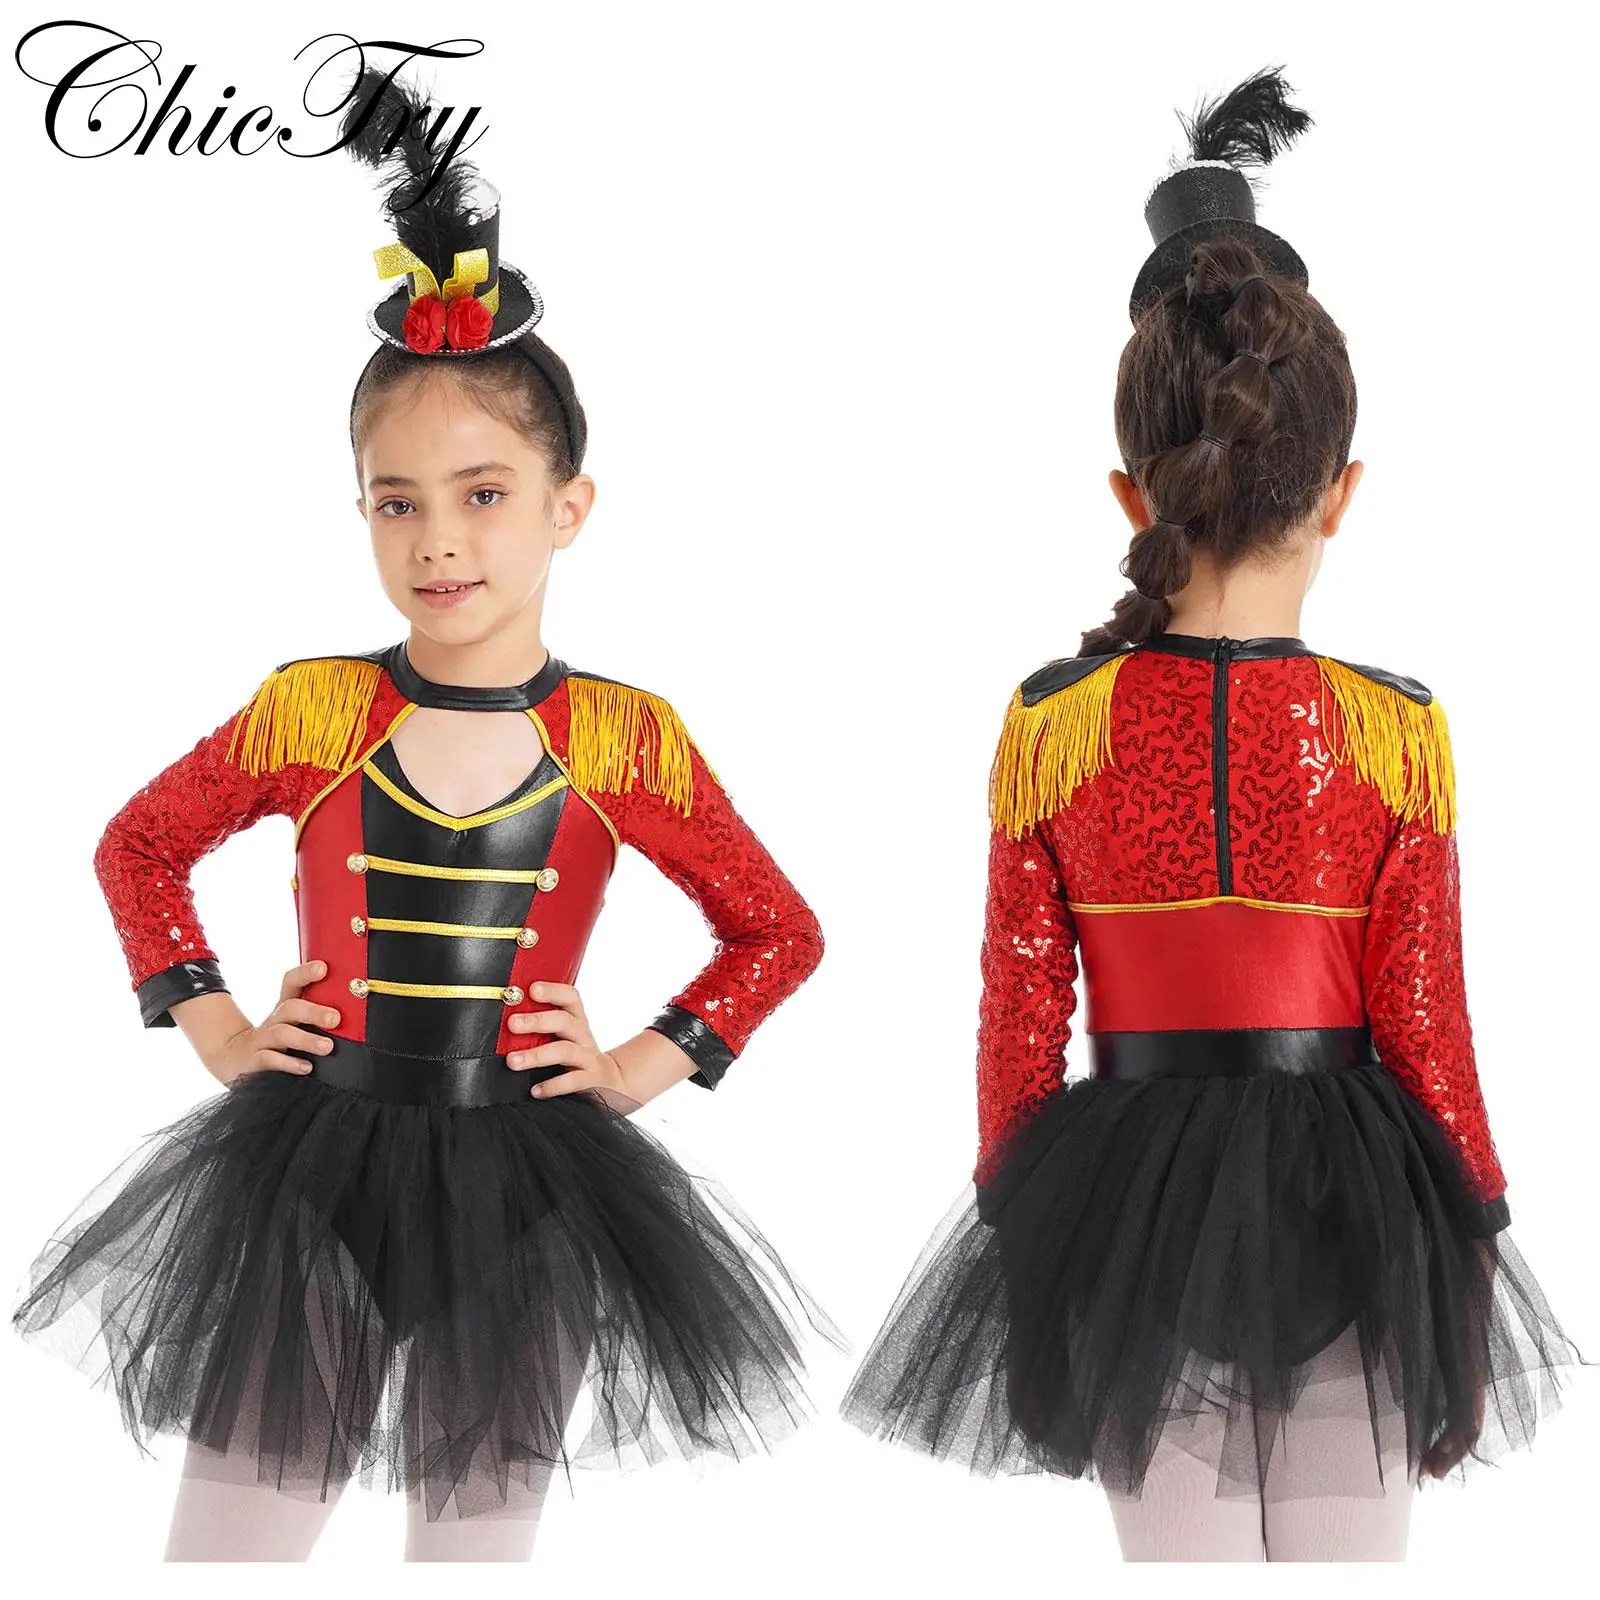 Kids Girls Circus Ringmaster Costume Halloween Cosplay Dress Long Sleeve Lion Tamer Themed Party Carnival Fancy Dress Up Clothes